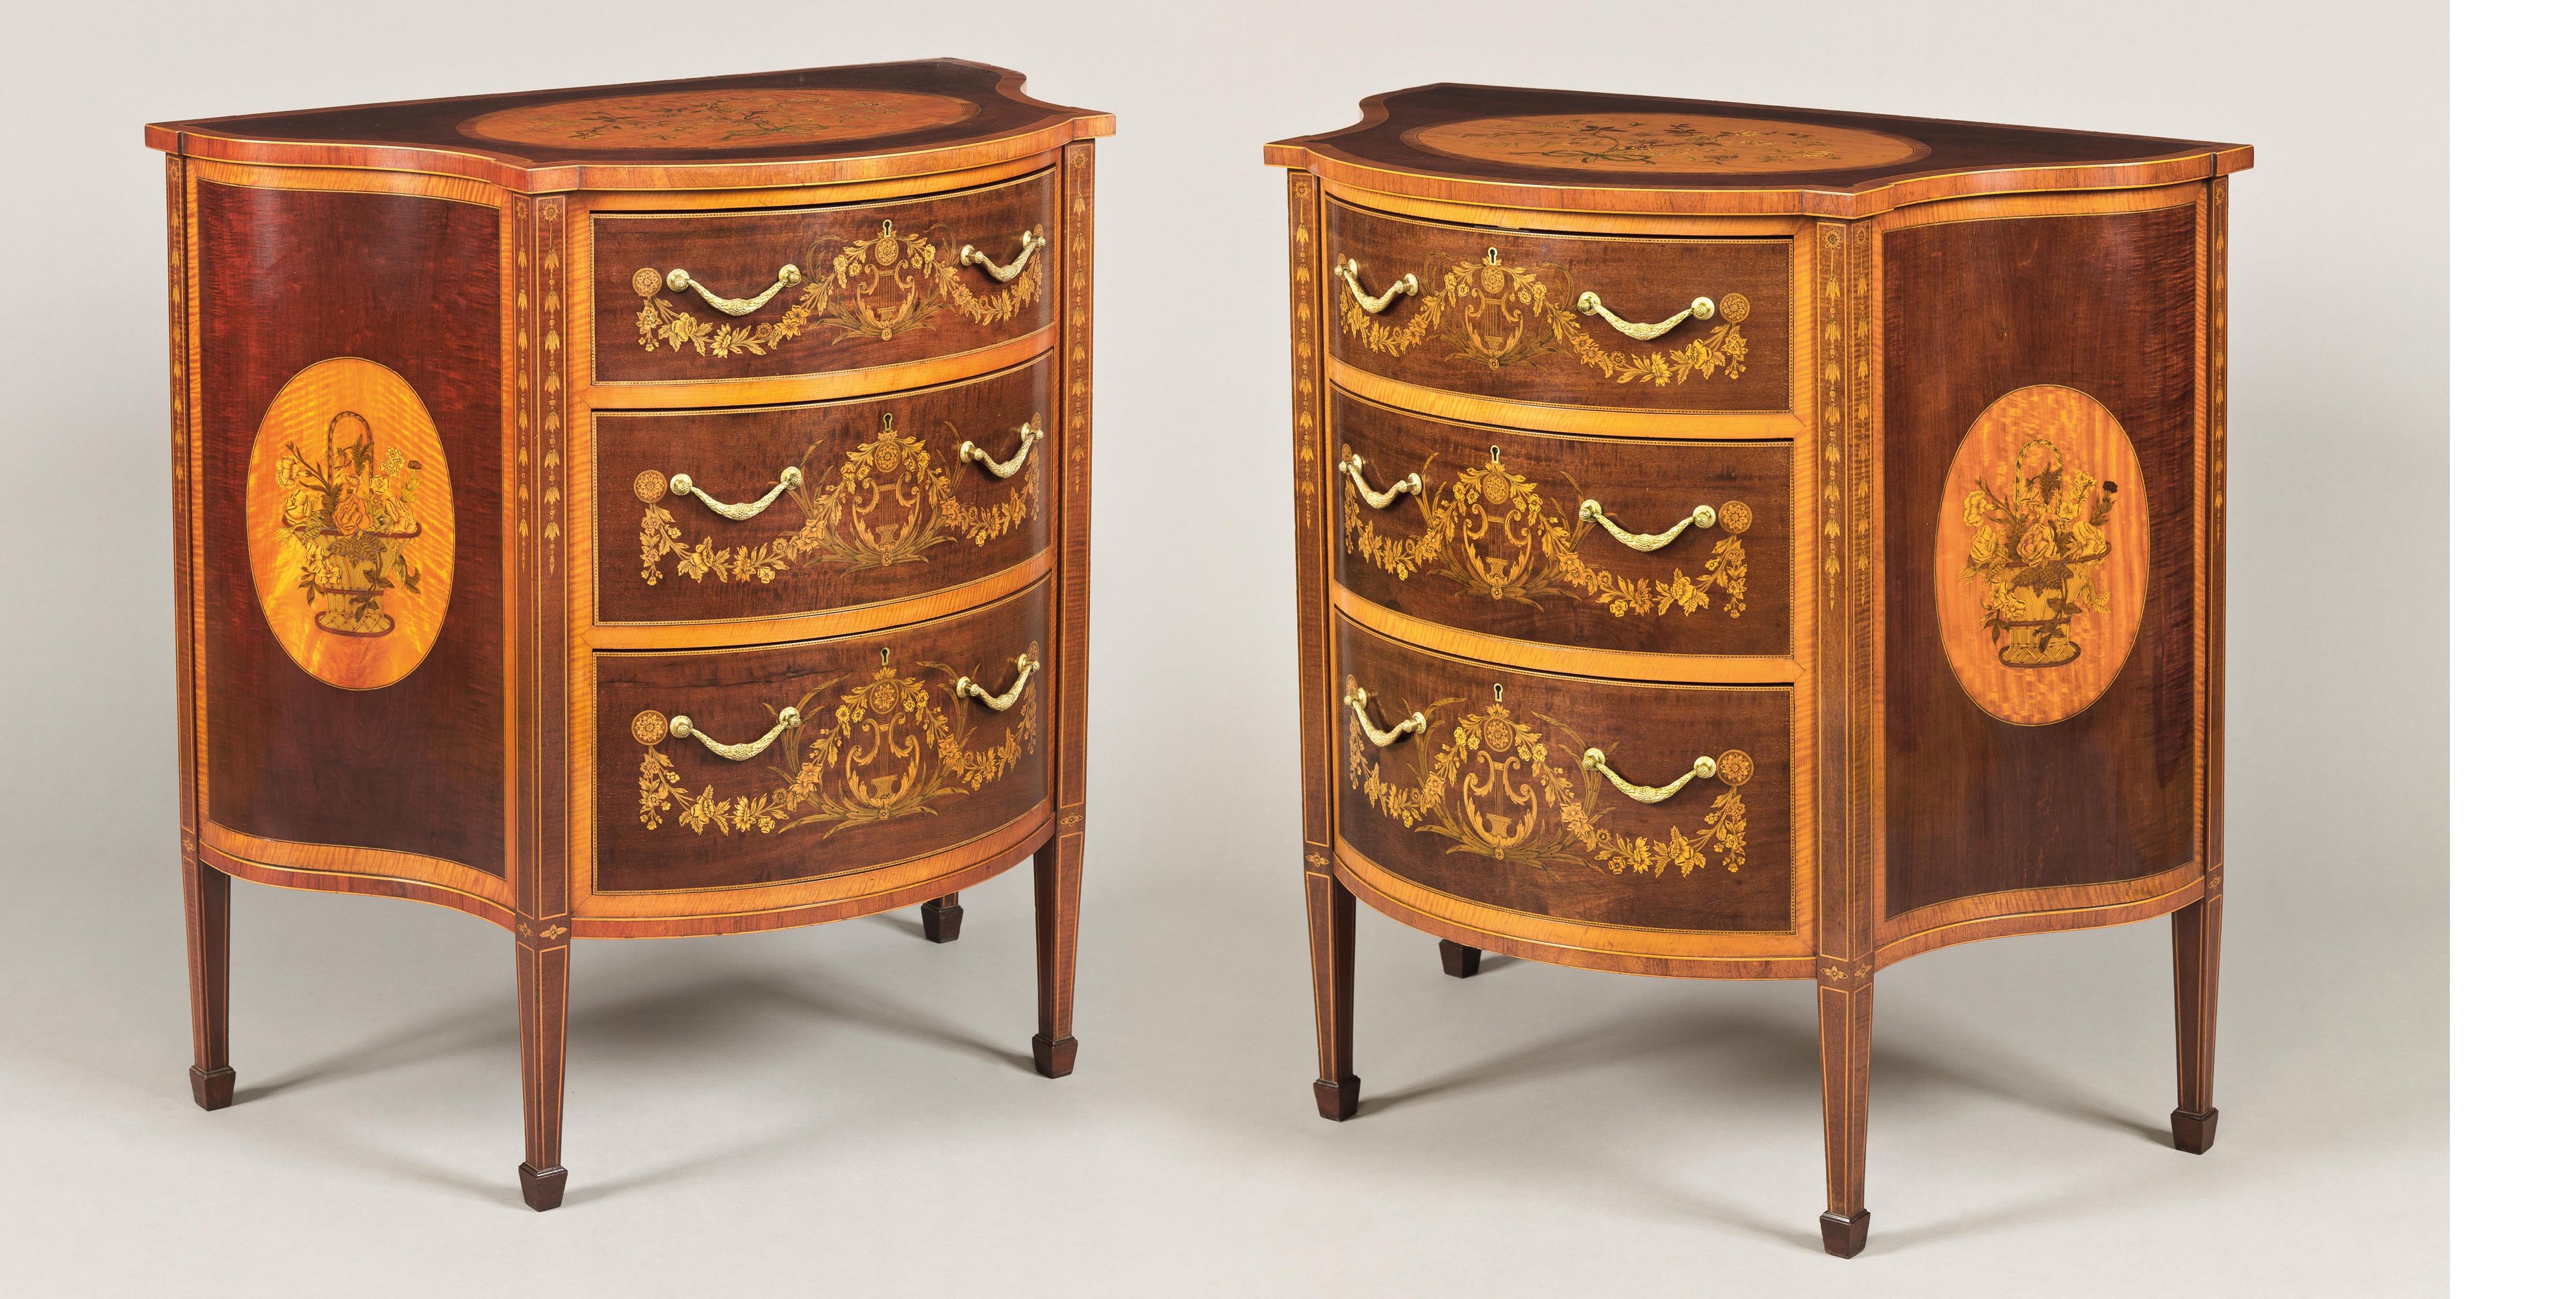 Superior Pair of Commodes in the Hepplewhite Manner Firmly Attributed to Edwa